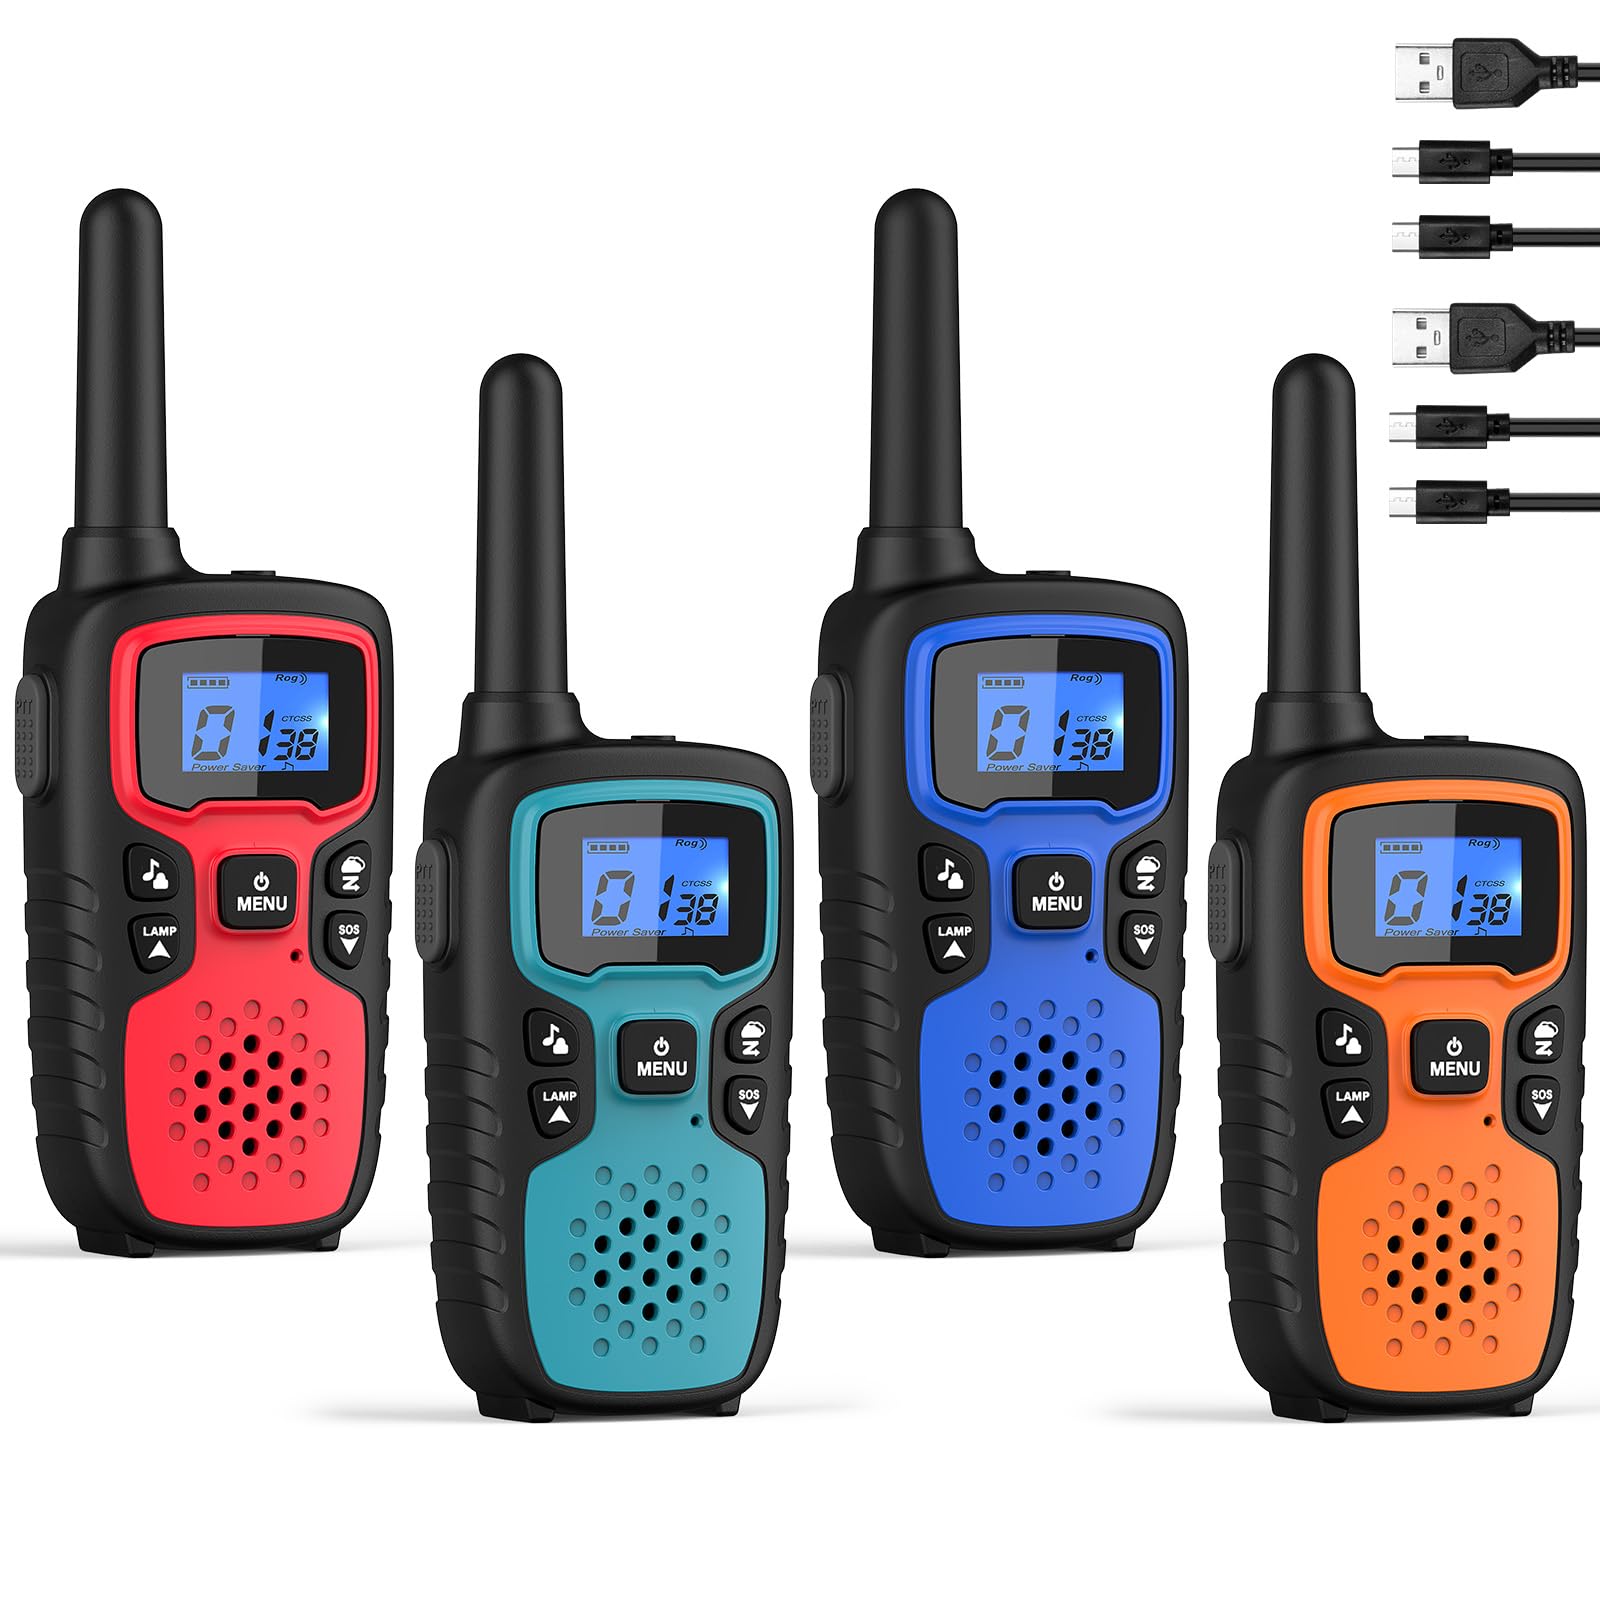 Walkie Talkies for Adults Long Range-Wishouse Handheld 2 Way Radios Rechargeable,Hiking Accessories Camping Xmas Birthday Gift for Kids with Lamp,SOS Siren,NOAA Weather Alert,VOX,Easy to Use 4 Pack